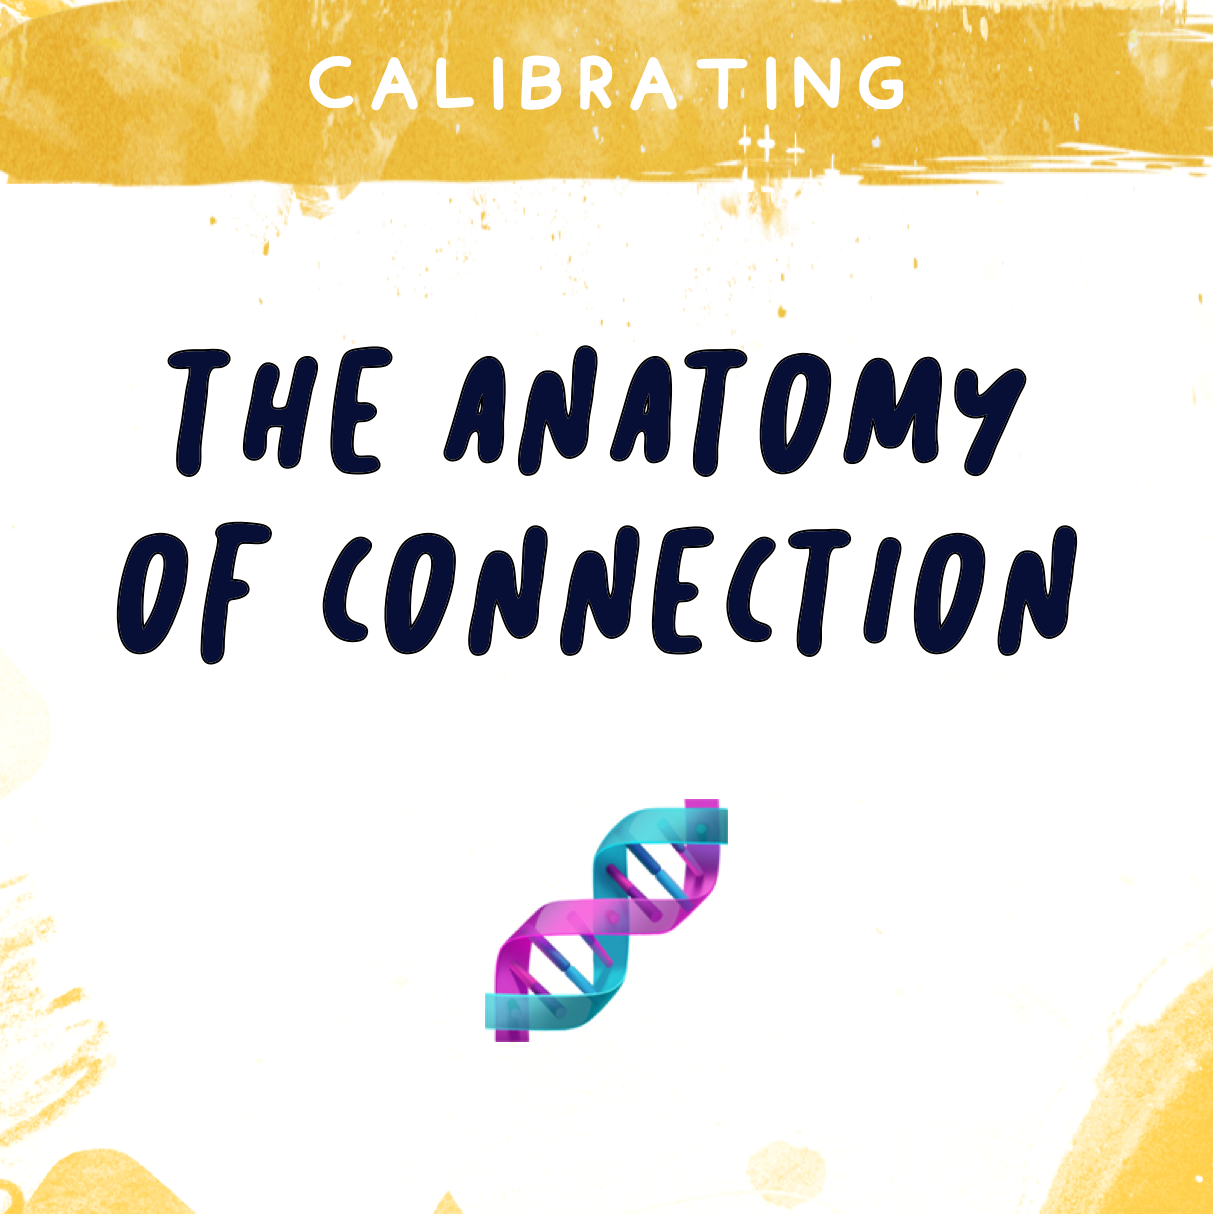 The Anatomy of Connection